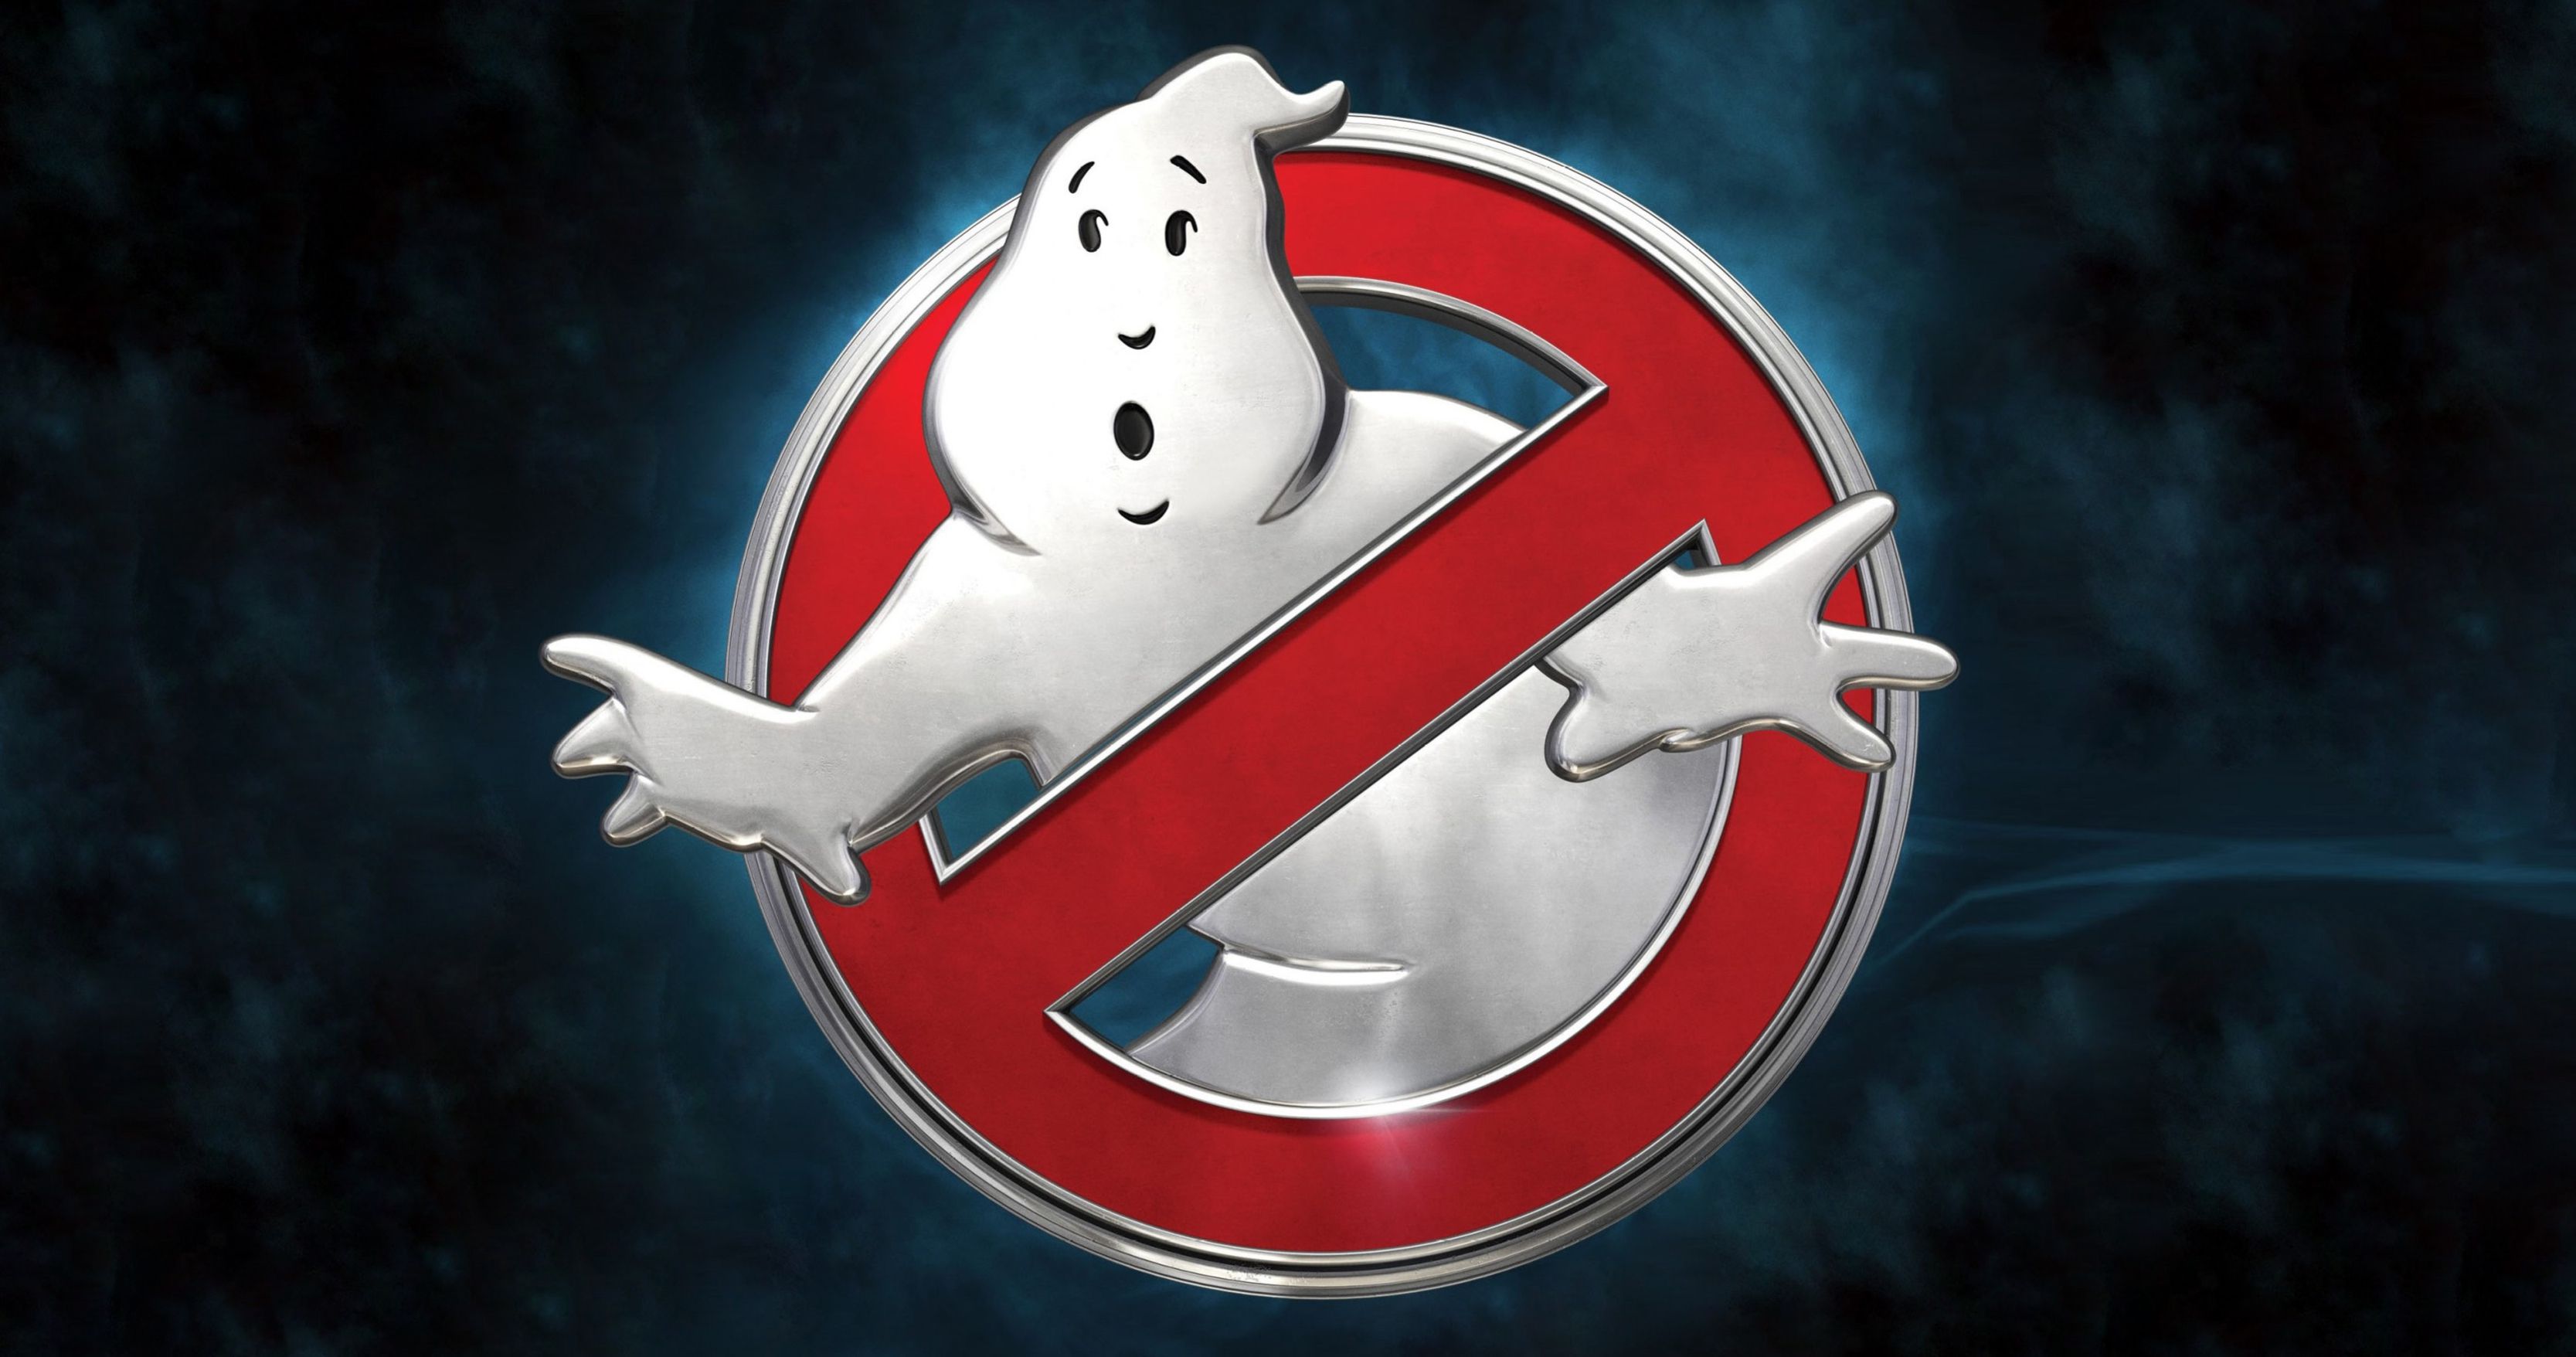 Ghostbusters Yearlong Celebration Announced for 35th Anniversary